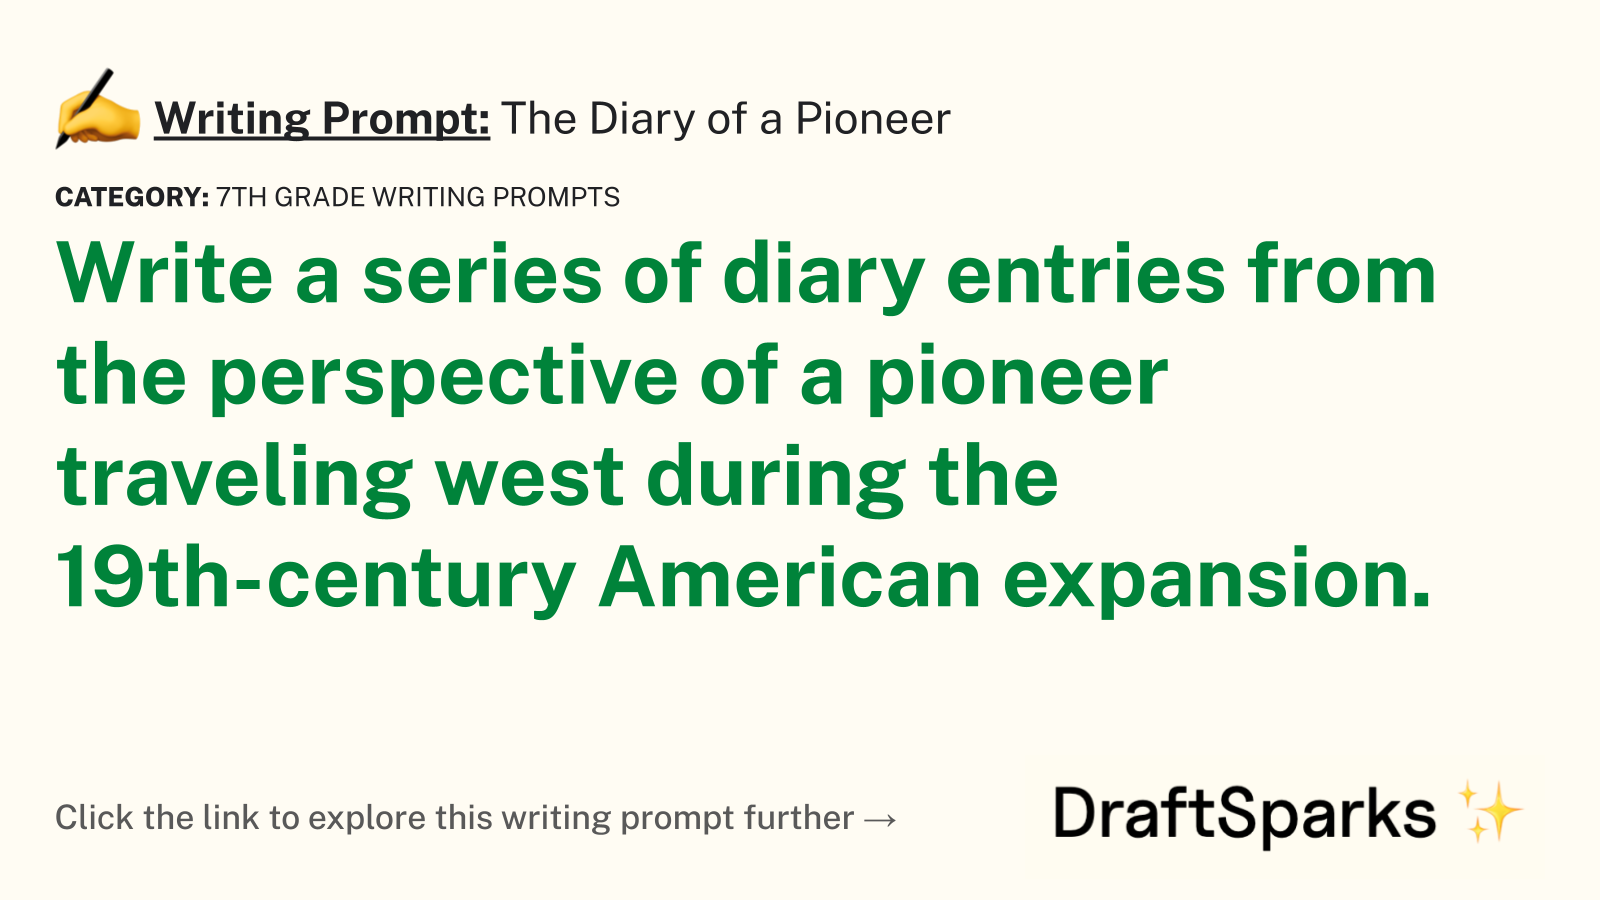 The Diary of a Pioneer